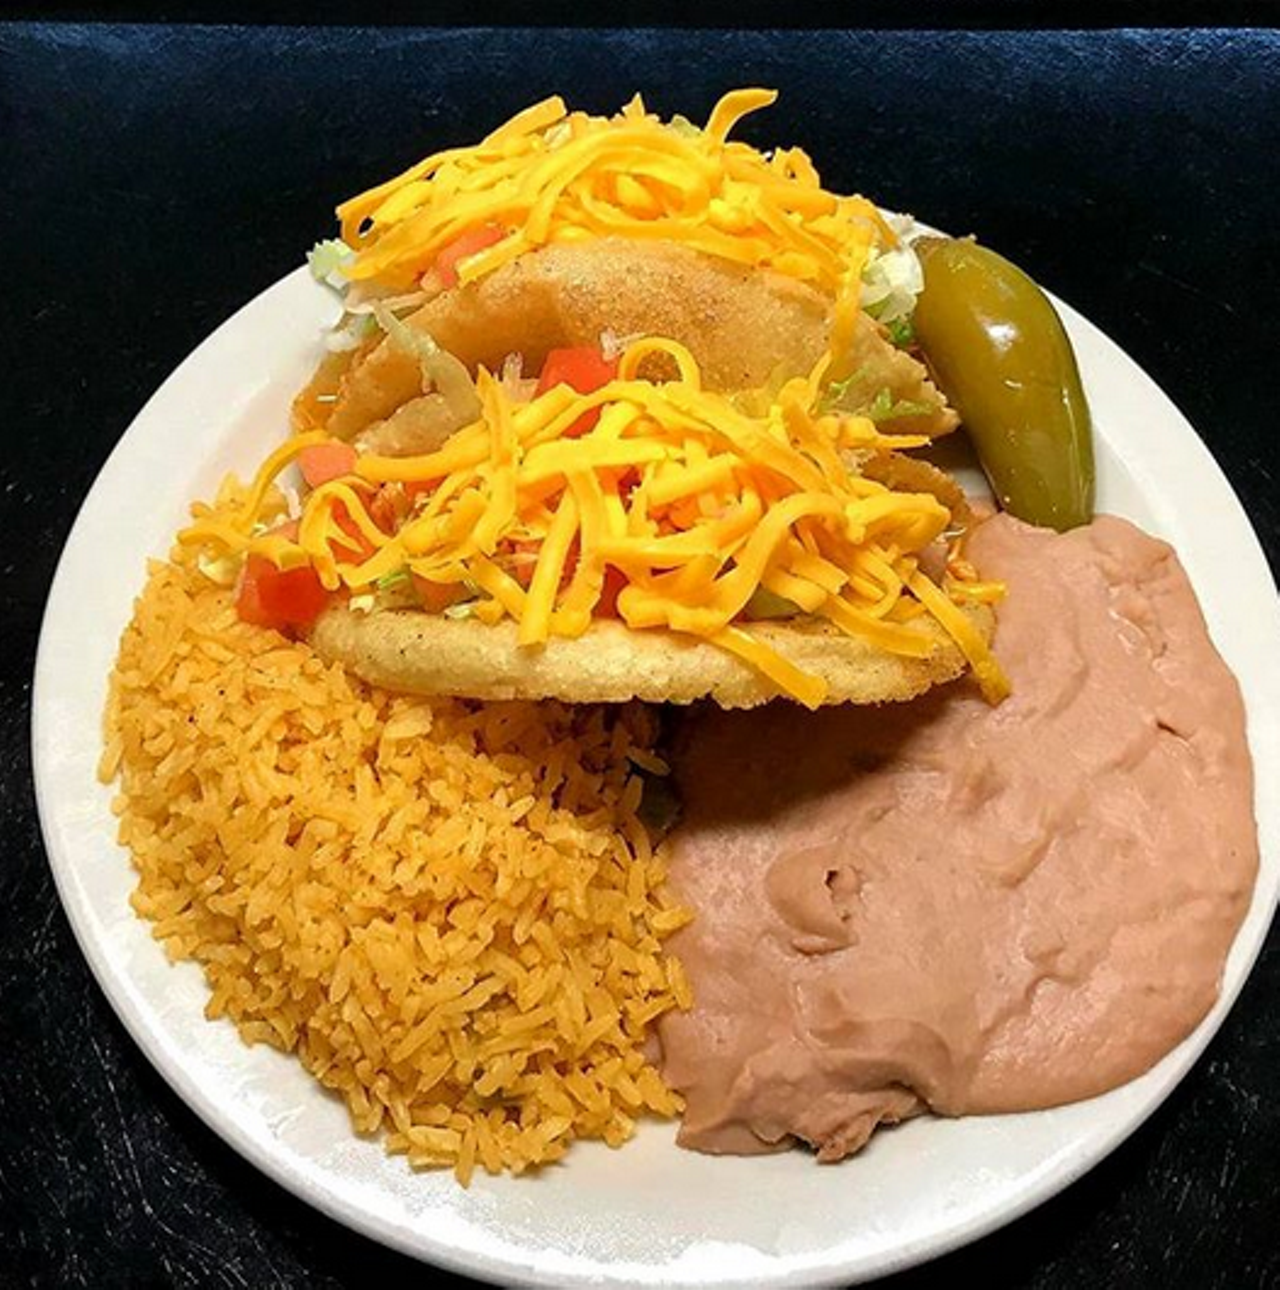 Ray's Puffy Tacos
822 SW 19th St., raysdriveinn.net
Order delivery or pickup from Ray's Drive Inn, who boasts the creation of the puffy taco. We’re not going to get in the middle of the puffy taco debate, but we will say that the drive-in model is super convenient for social distancing. 
Photo via Instagram /  
raysdriveinn